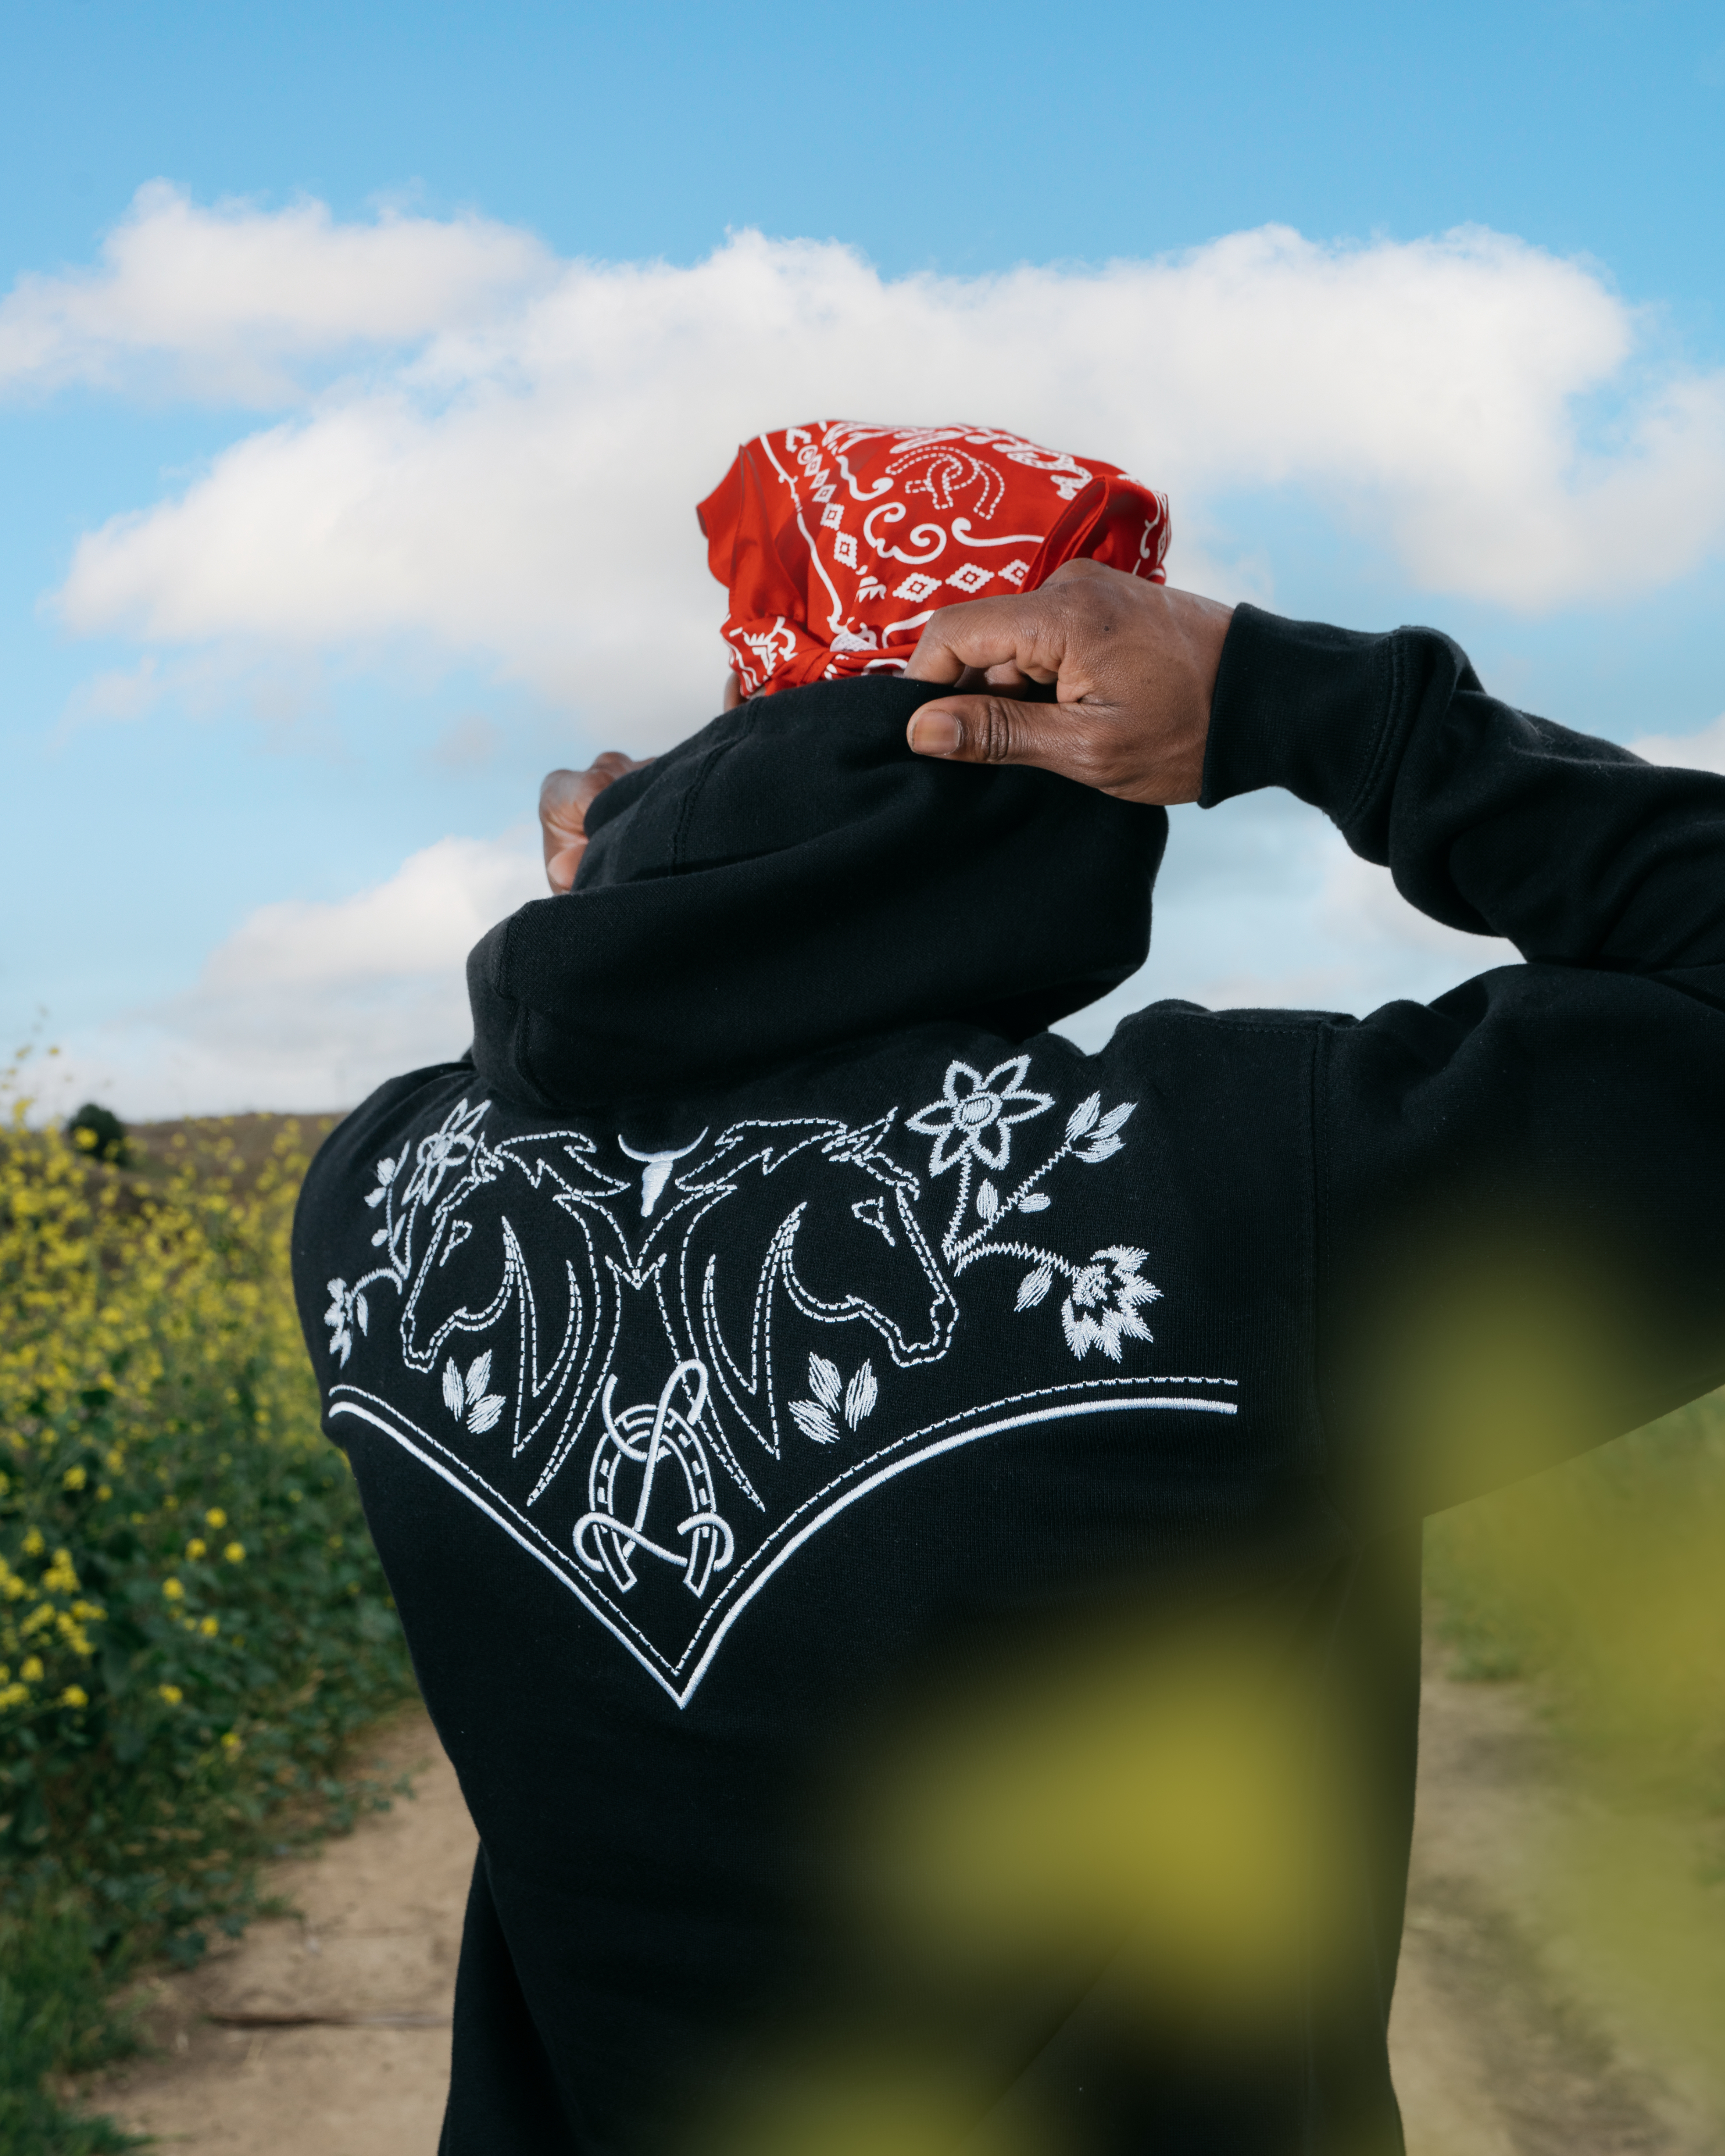 Person outdoors, facing away, adjusting a red bandana, wearing a hoodie with a horse and floral embroidery design